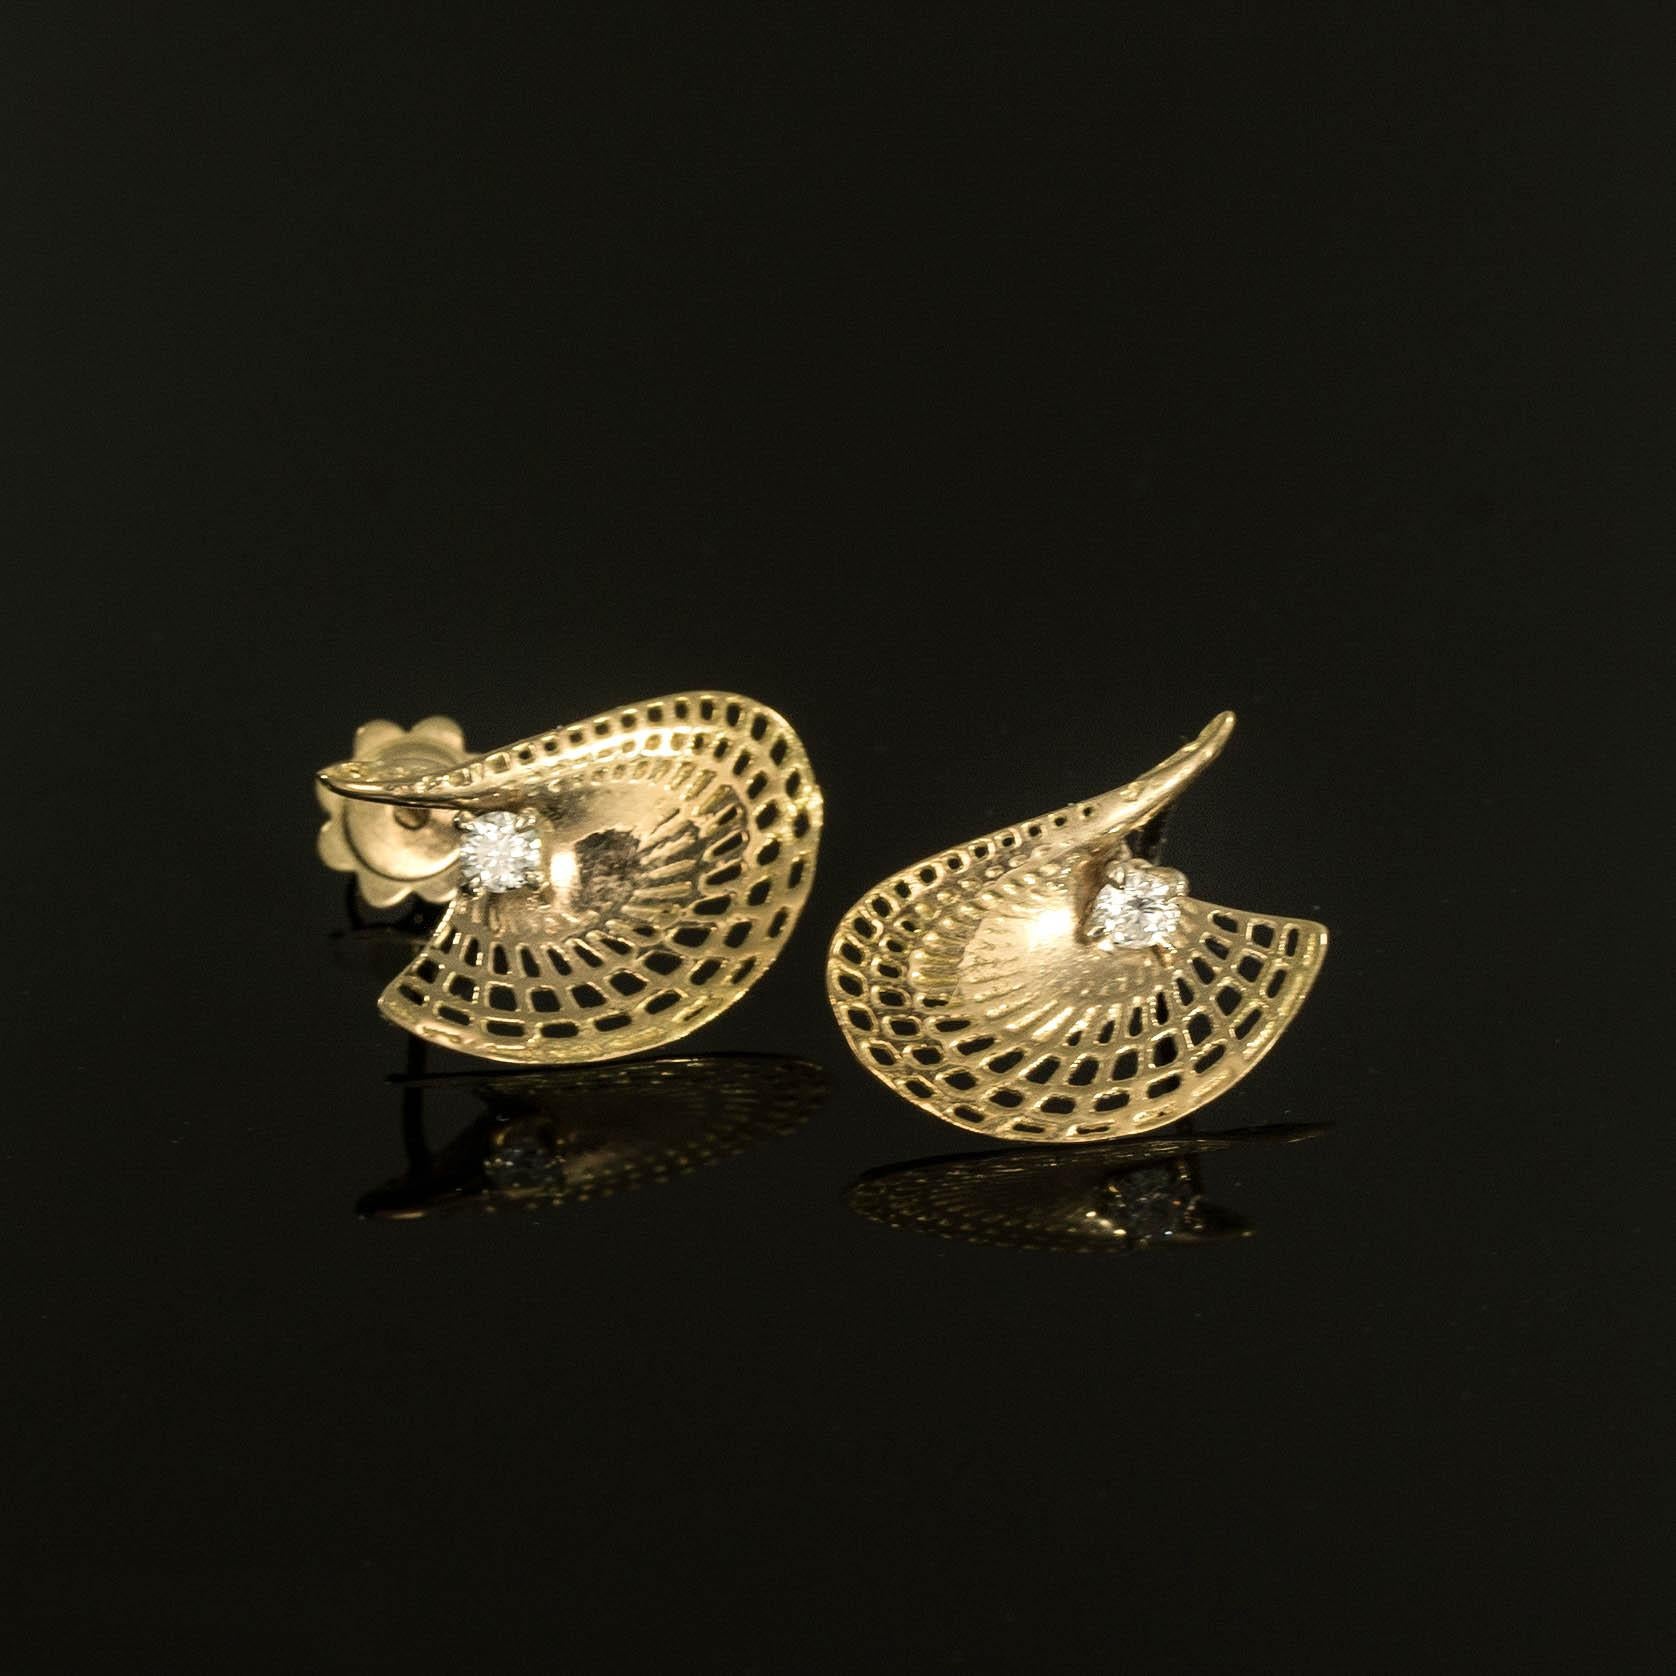 Contemporary 14 Karat Yellow Gold Small Twisted Disk Stud Earrings.